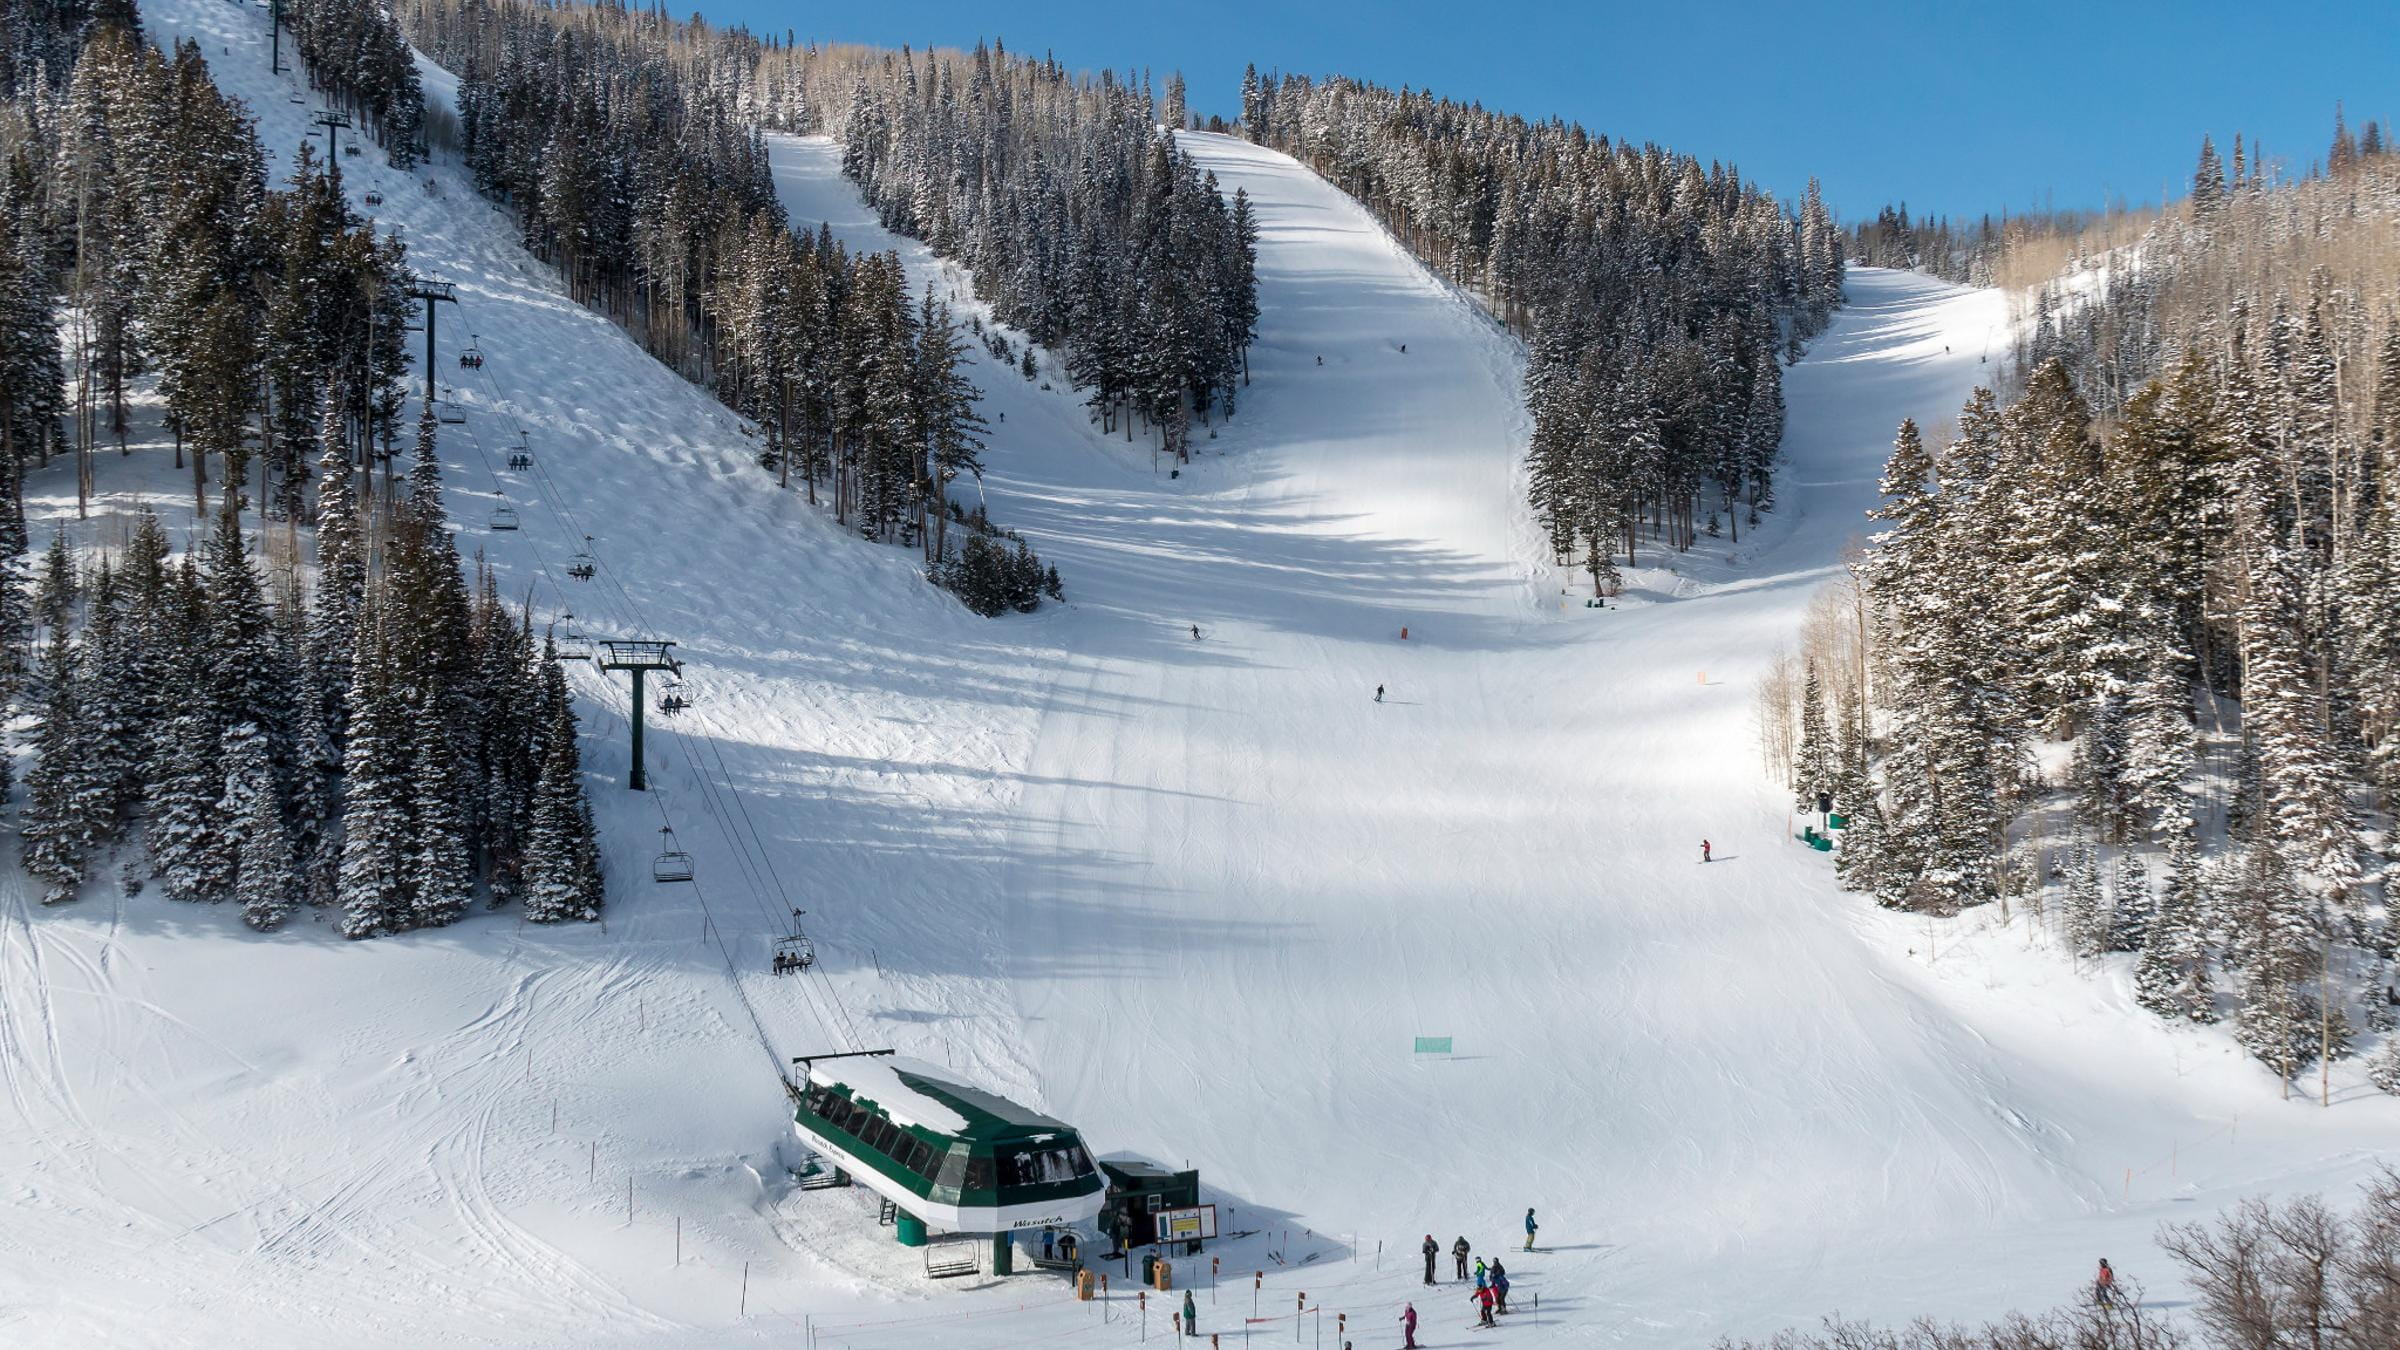 Wasatch Express Chairlift in the winter